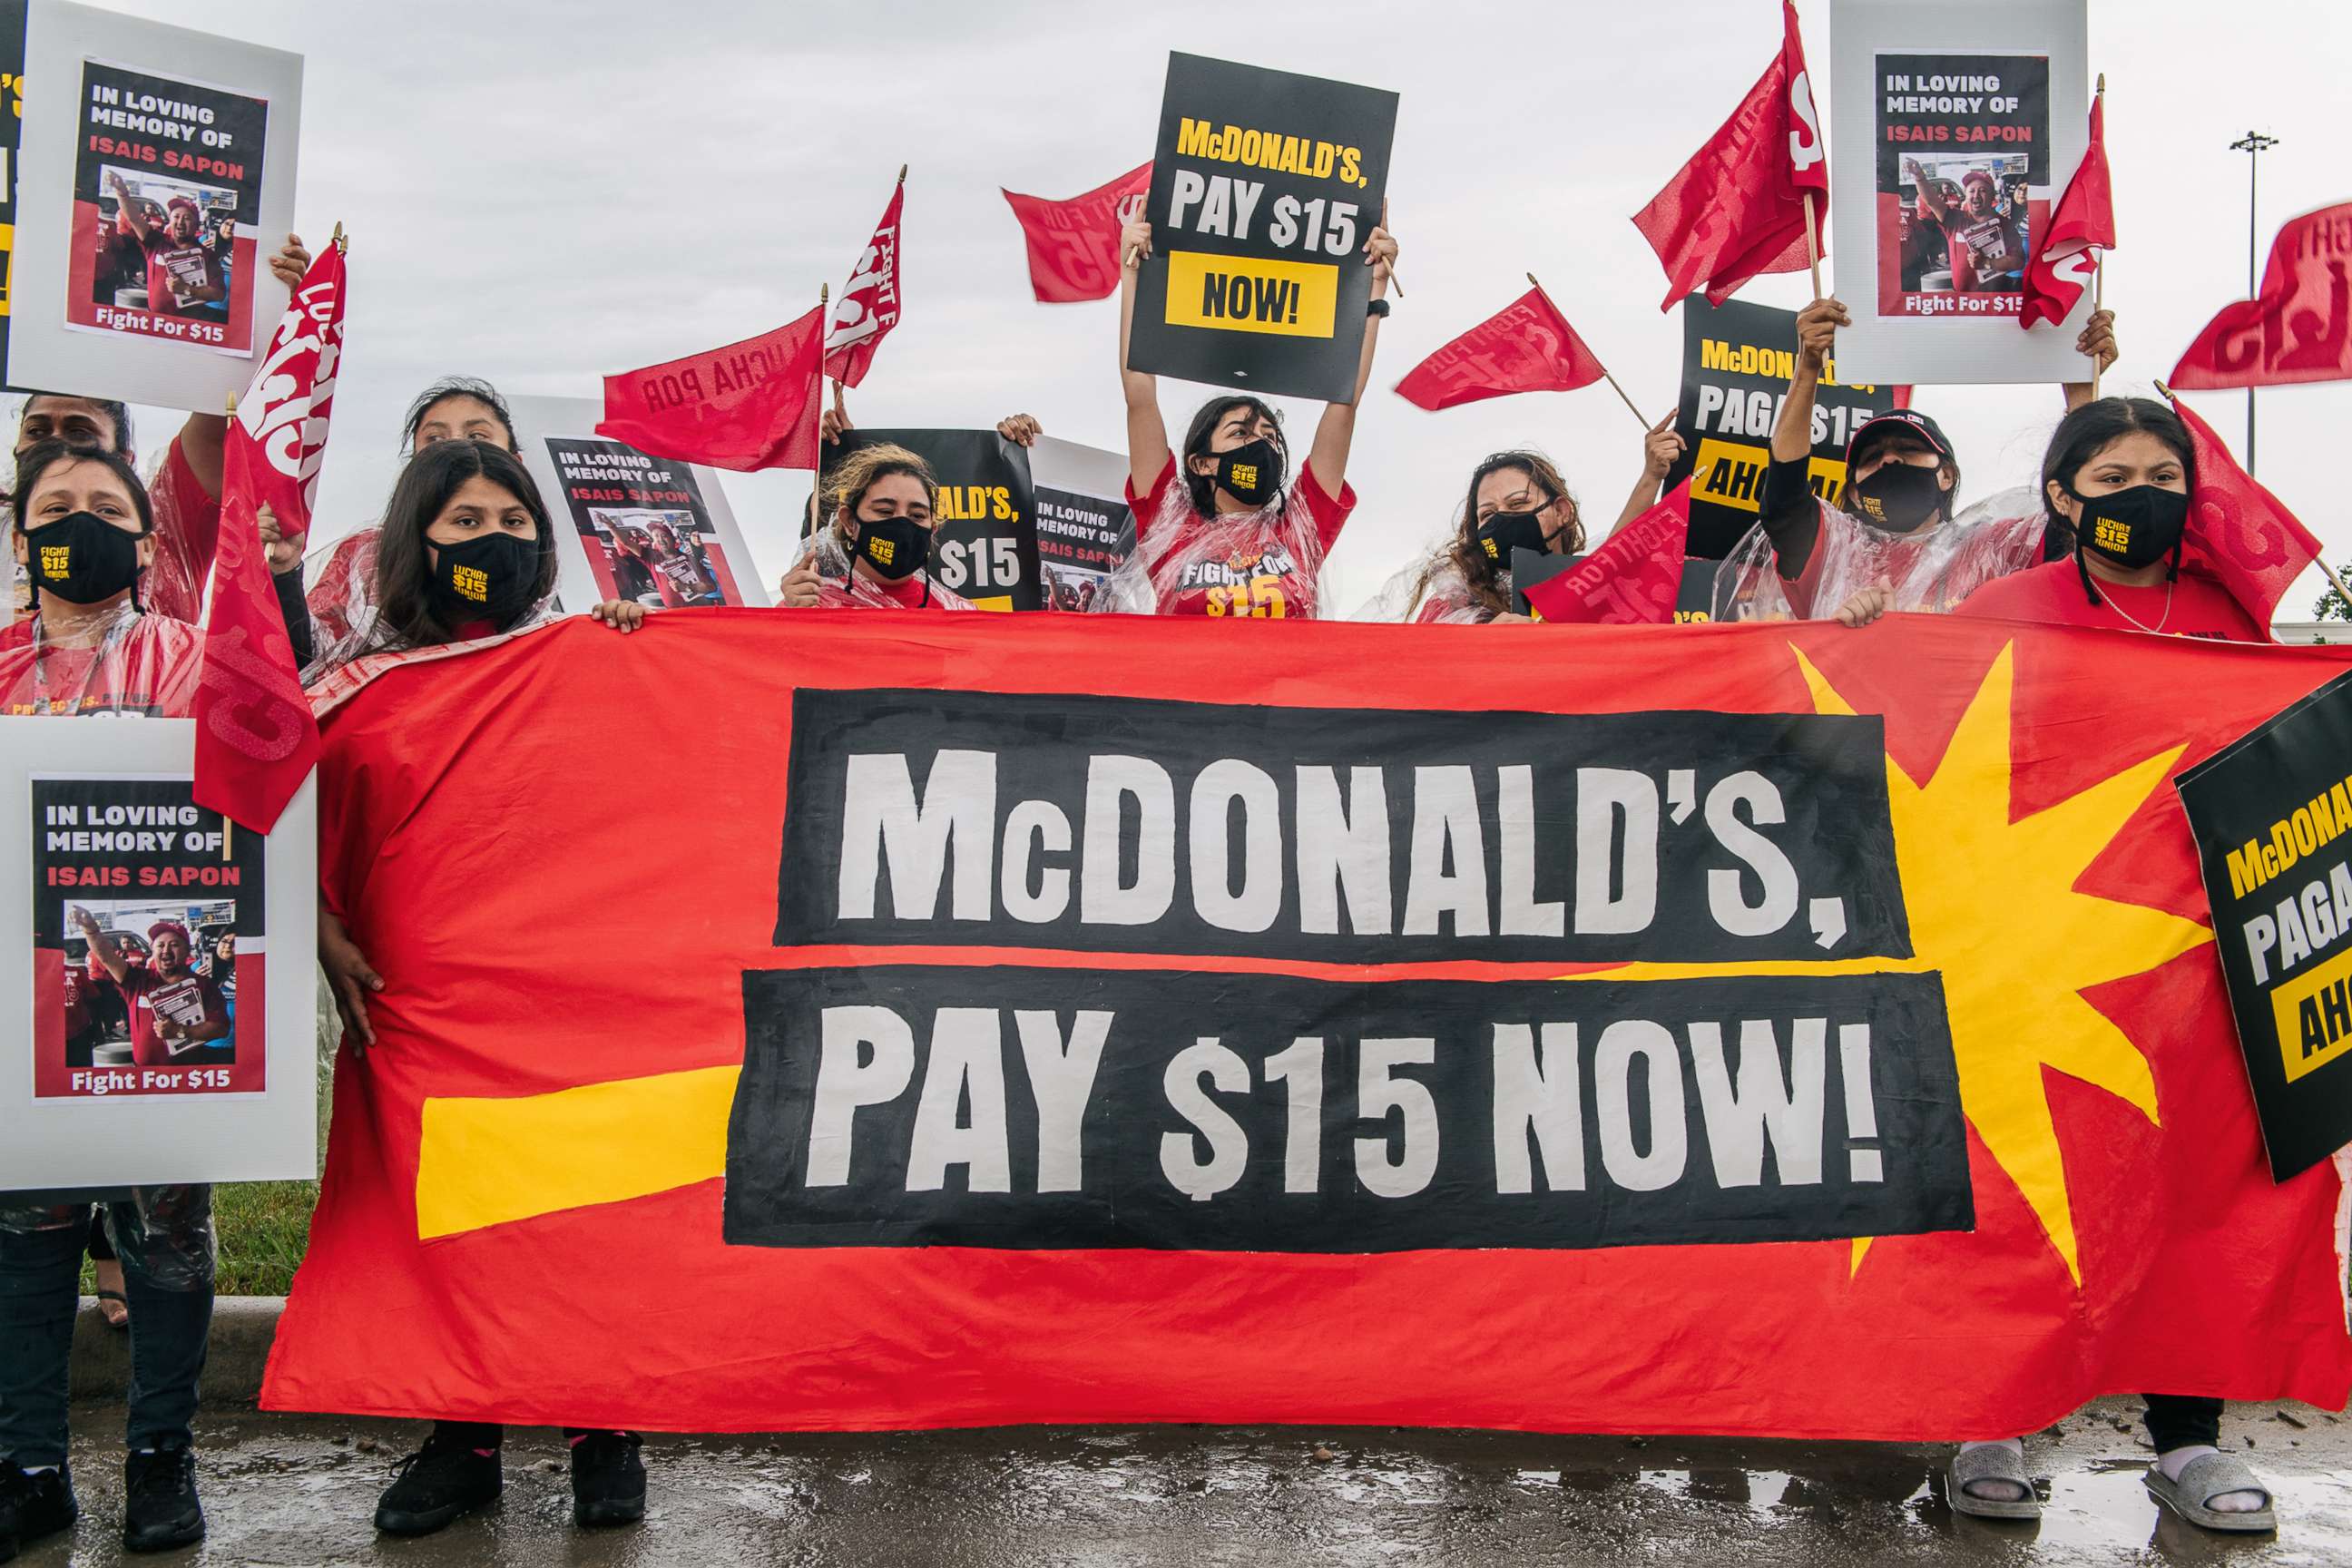 PHOTO: Women chant and display banners during a rally on May 19, 2021 in Houston. Fast-food workers, community members, and activists gathered nationwide to demand McDonald's to raise its minimum wage to $15 an hour.